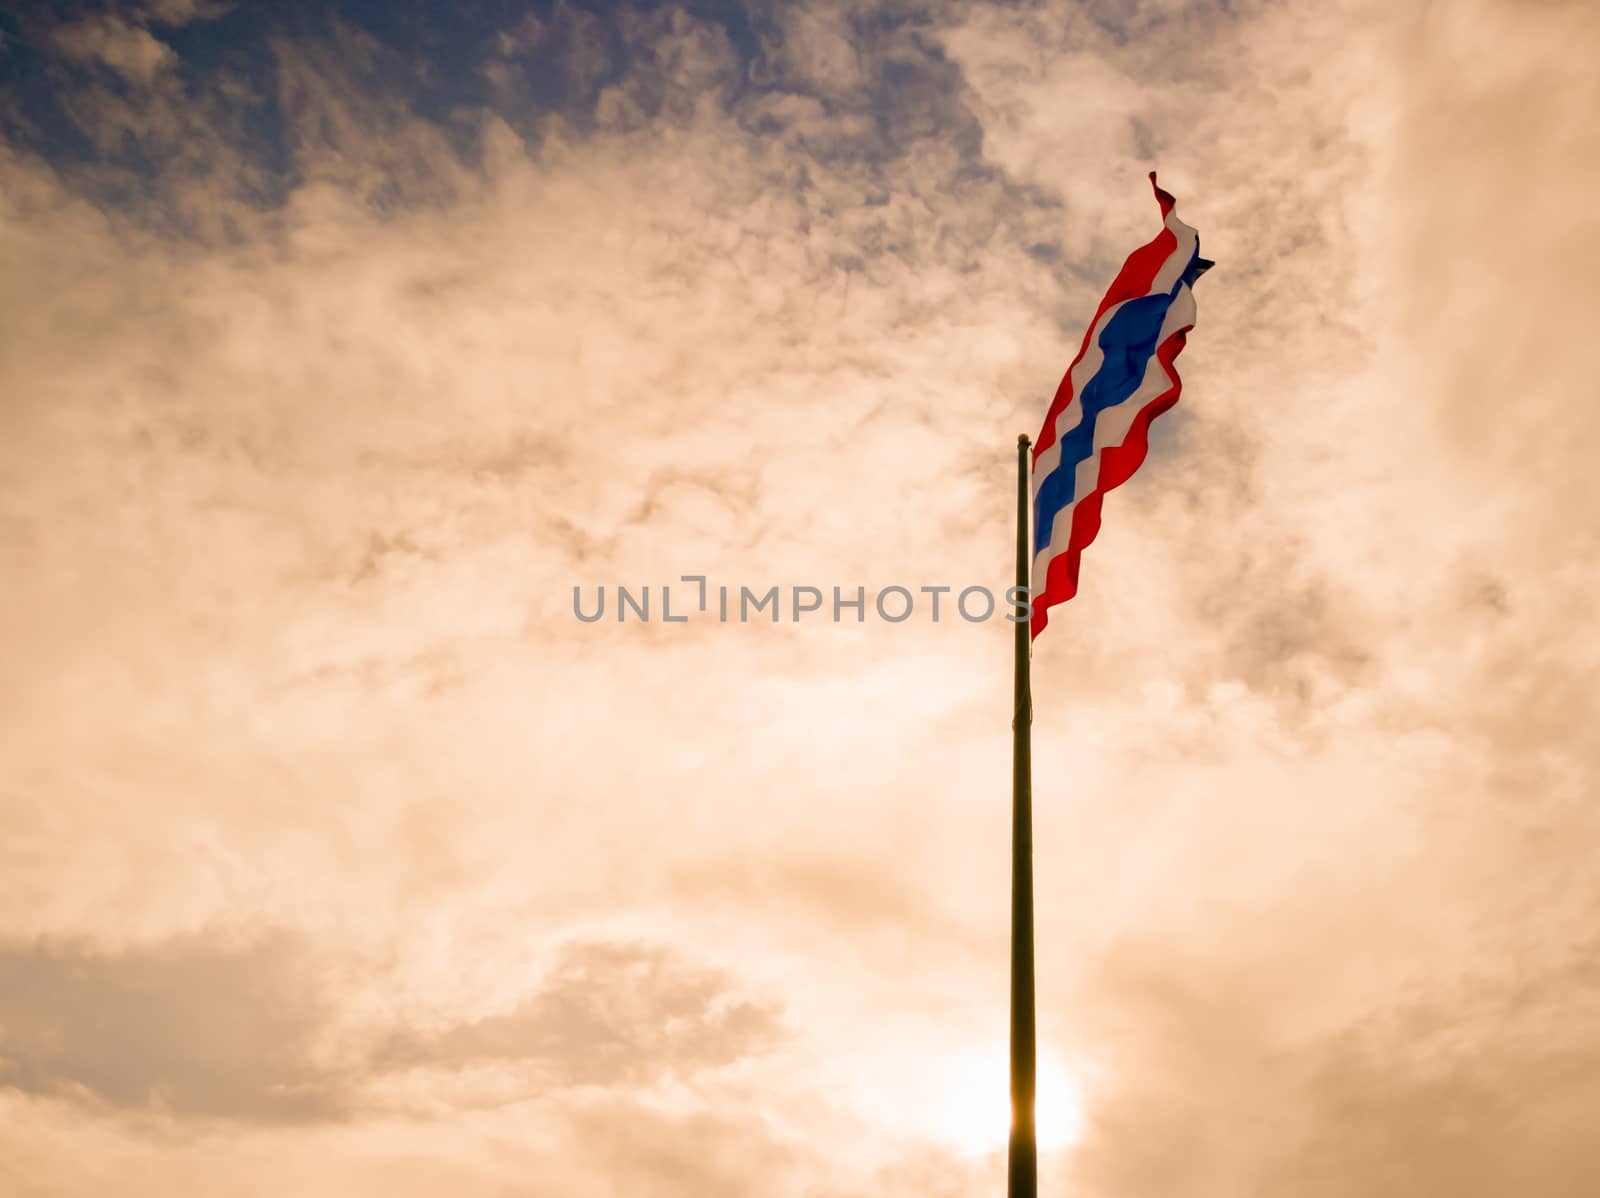 The sunrise sky with Thai flag blowing in the wind by psodaz